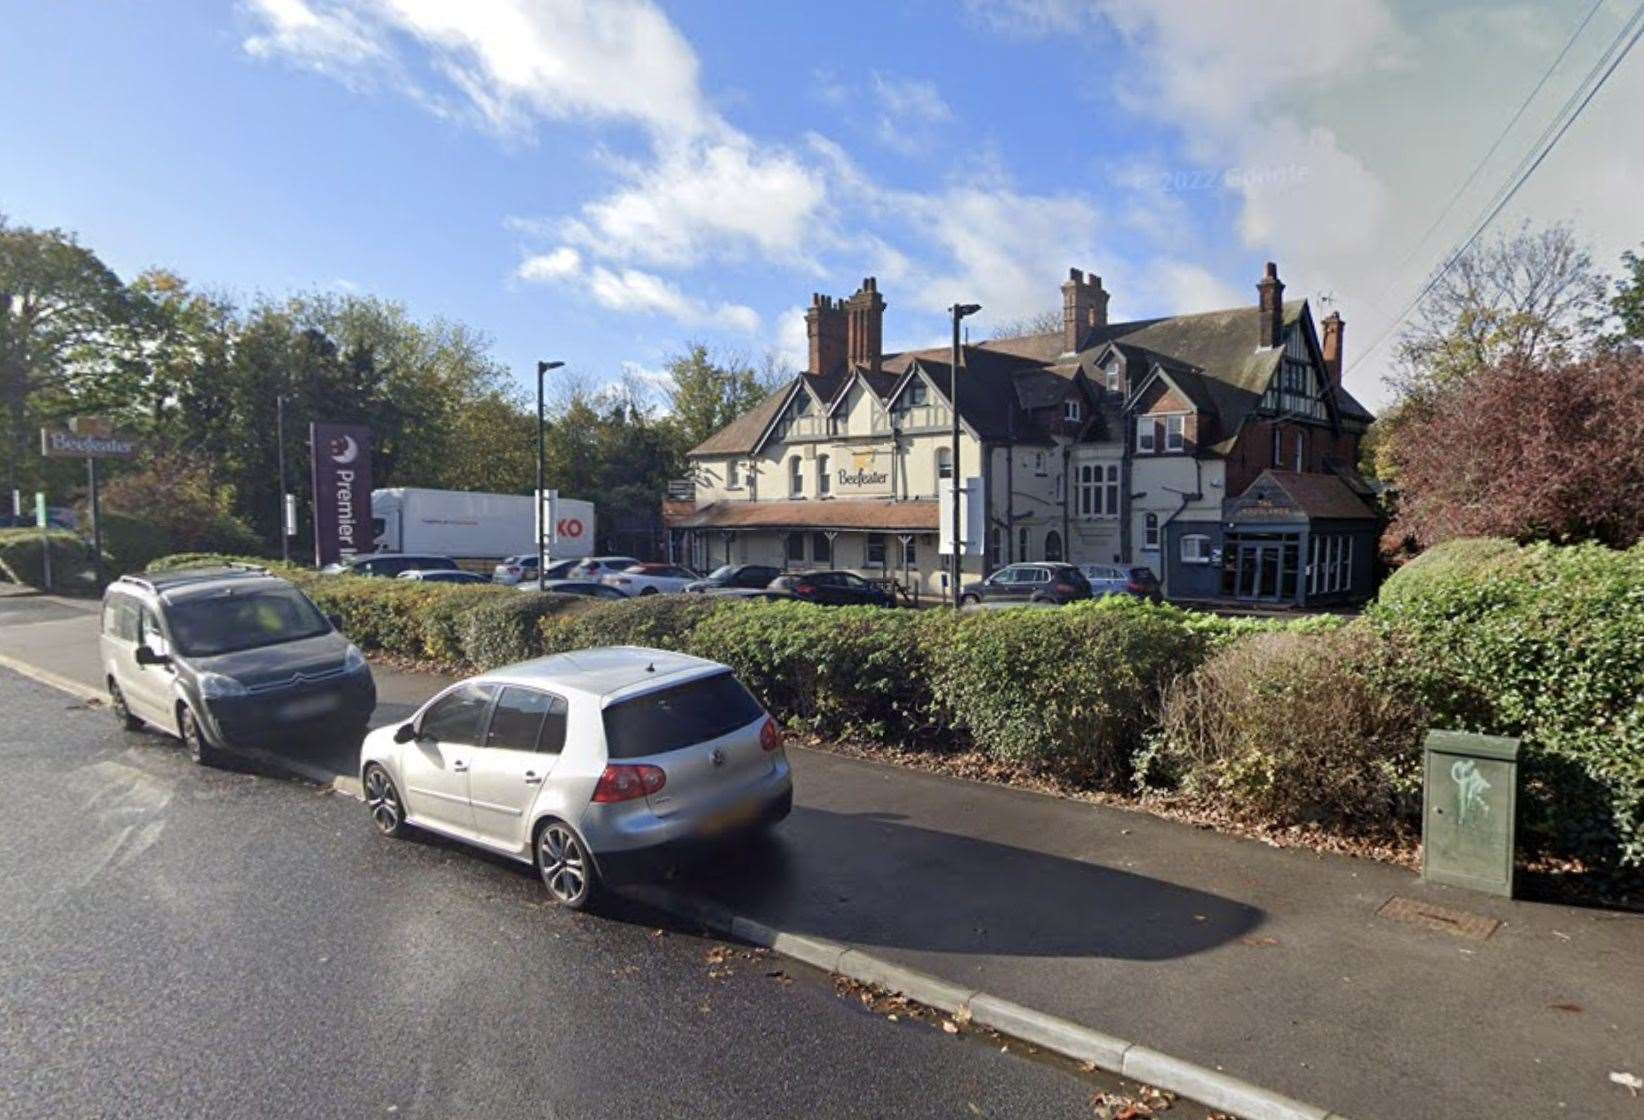 Armed police and a fire service drone aided in the search for a man reportedly carrying a weapon near the Beefeater in Wrotham Road, Gravesend. Picture: Google